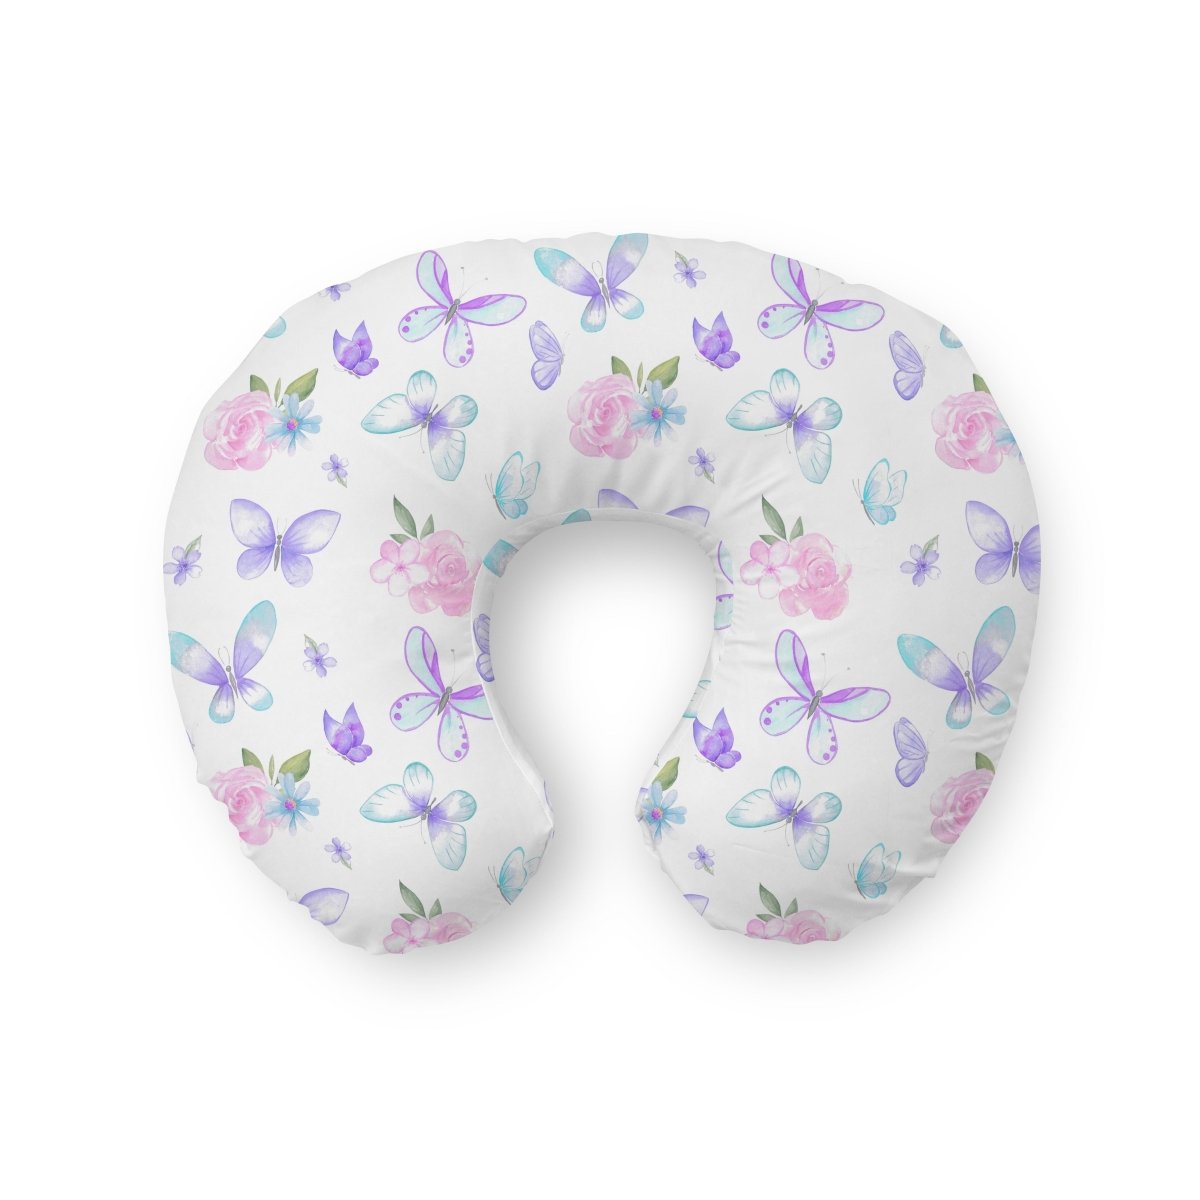 Butterfly Floral Nursing Pillow Cover - Butterfly Floral, gender_girl, Theme_Butterfly